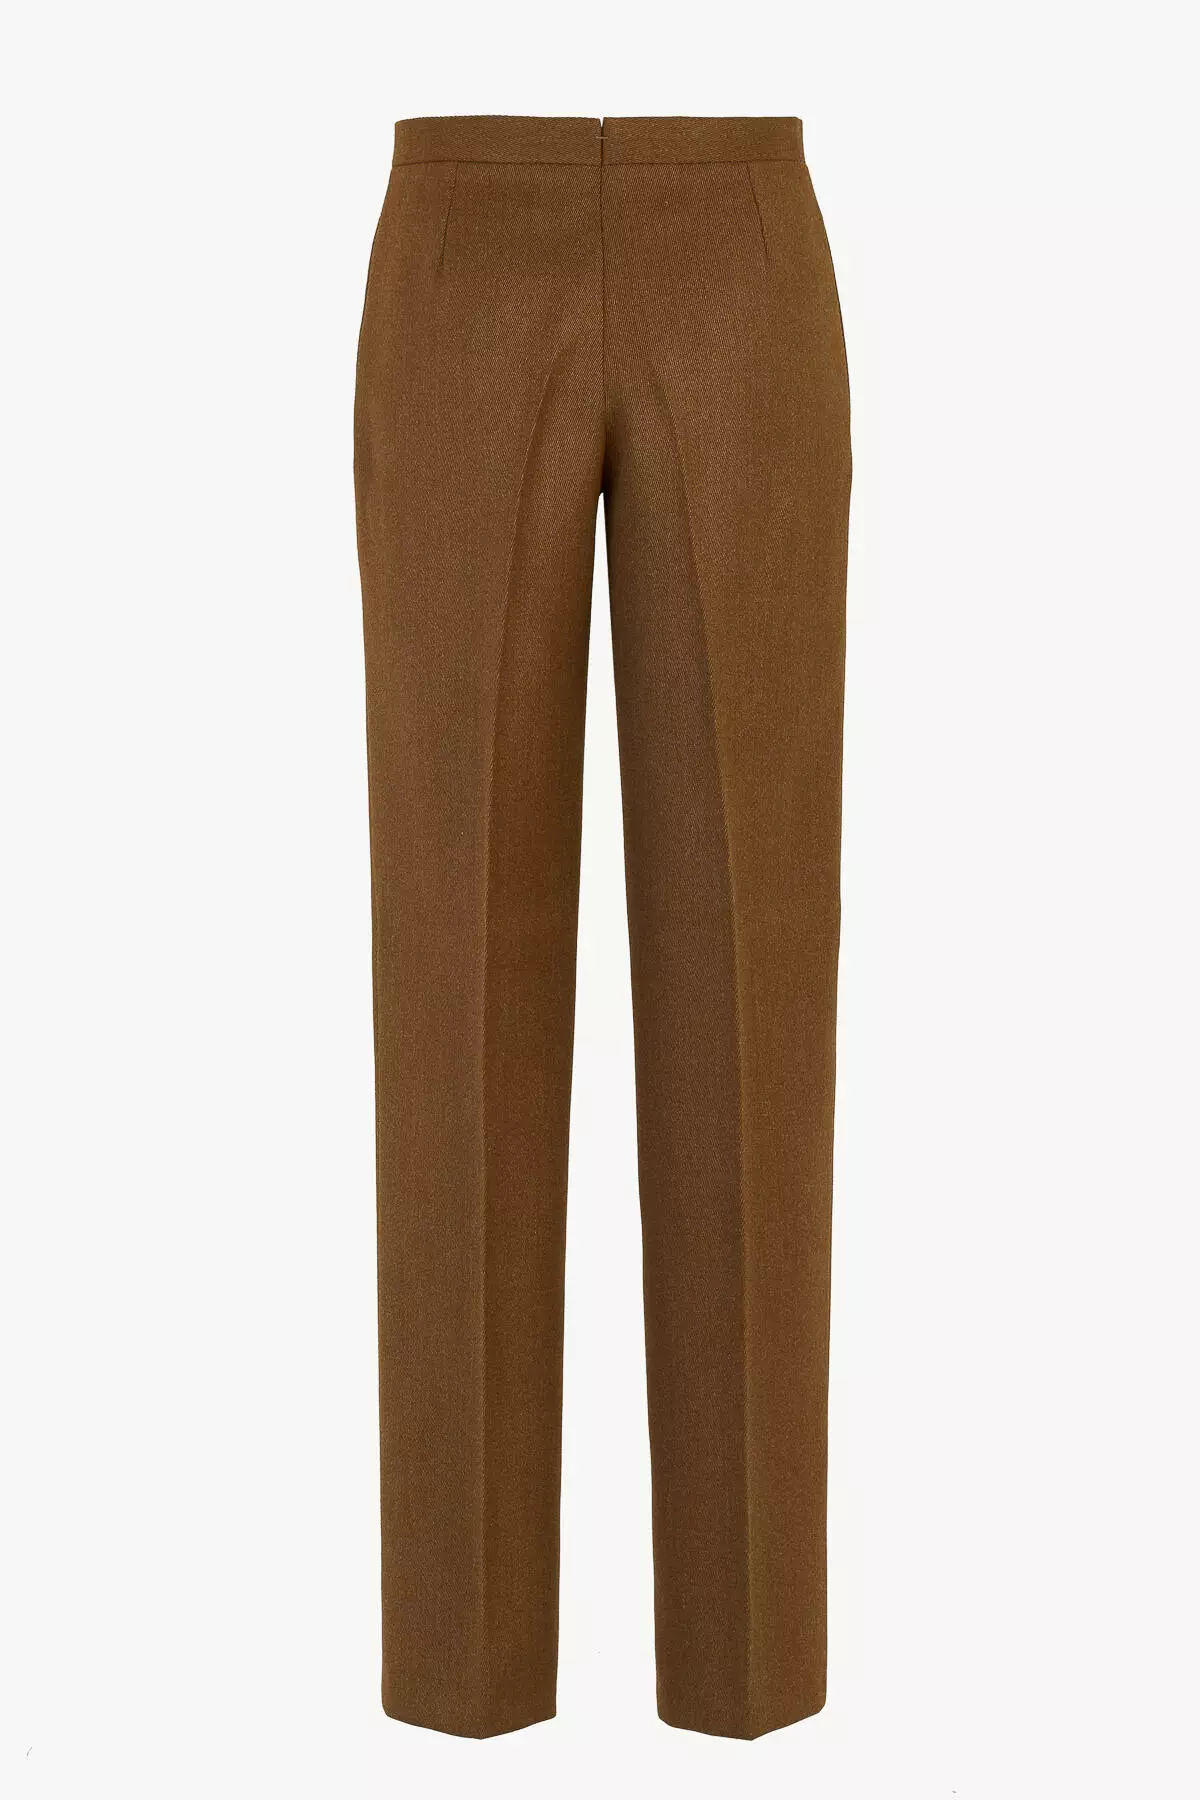 - in Giuliva Trousers Heritage Janice Whipcord Wool